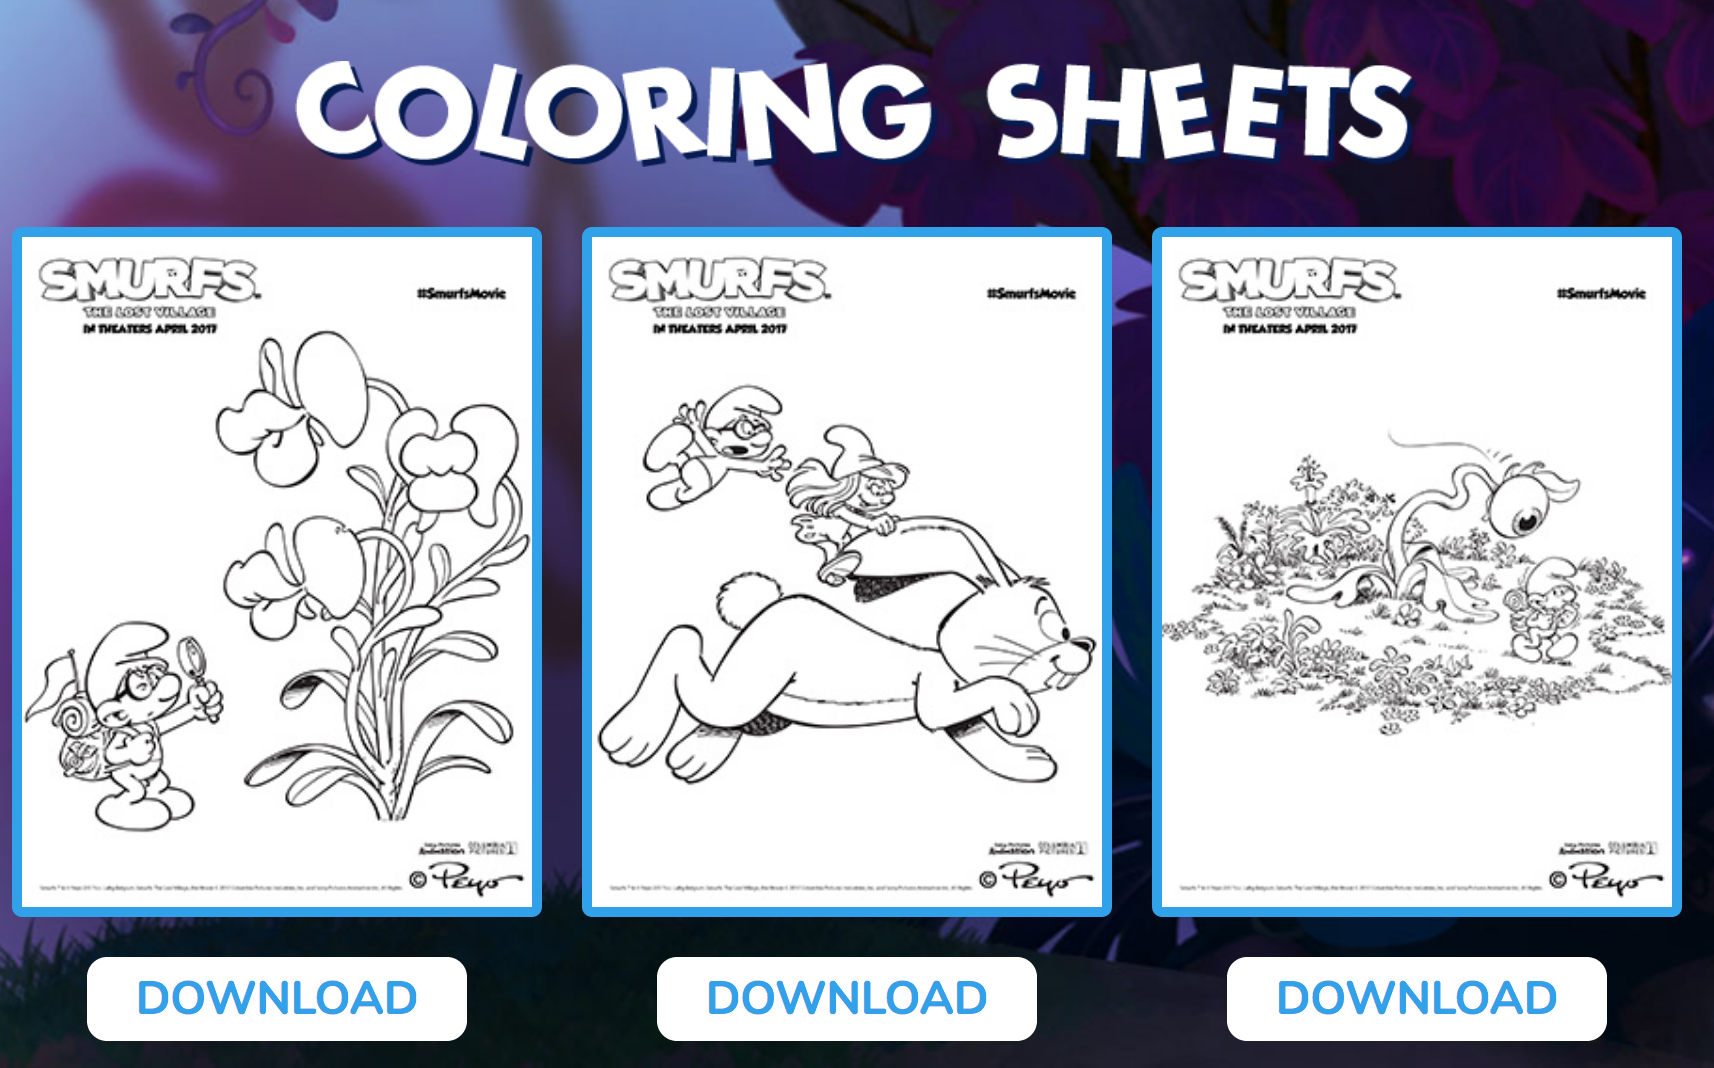 Smurfs The Lost Village Coloring Sheets